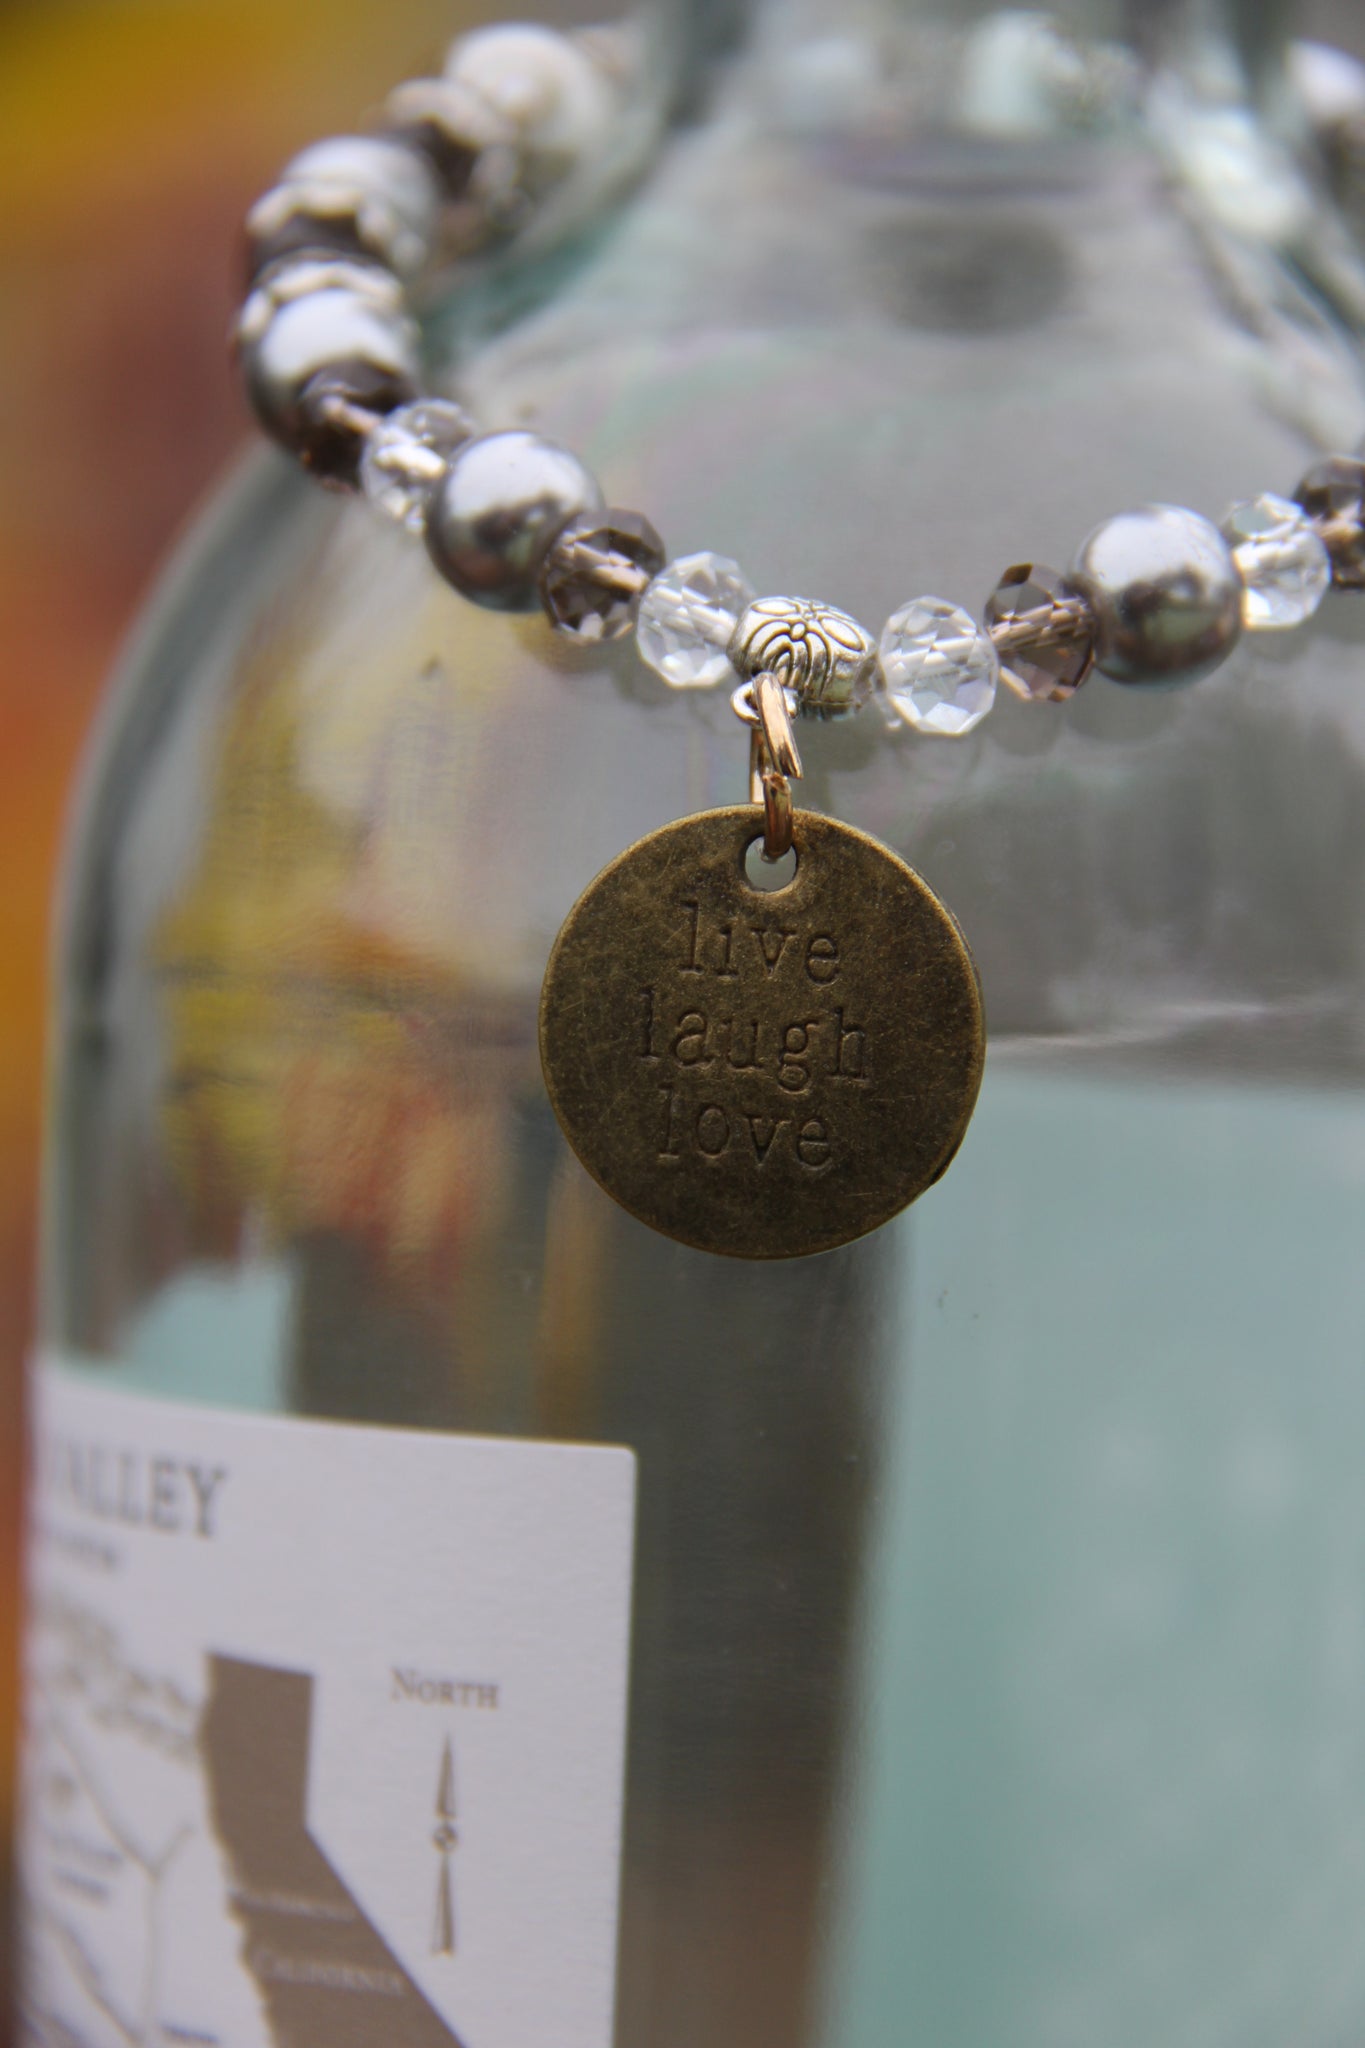 Bottle bracelet made with Grey glass beads with "live laugh love" charm